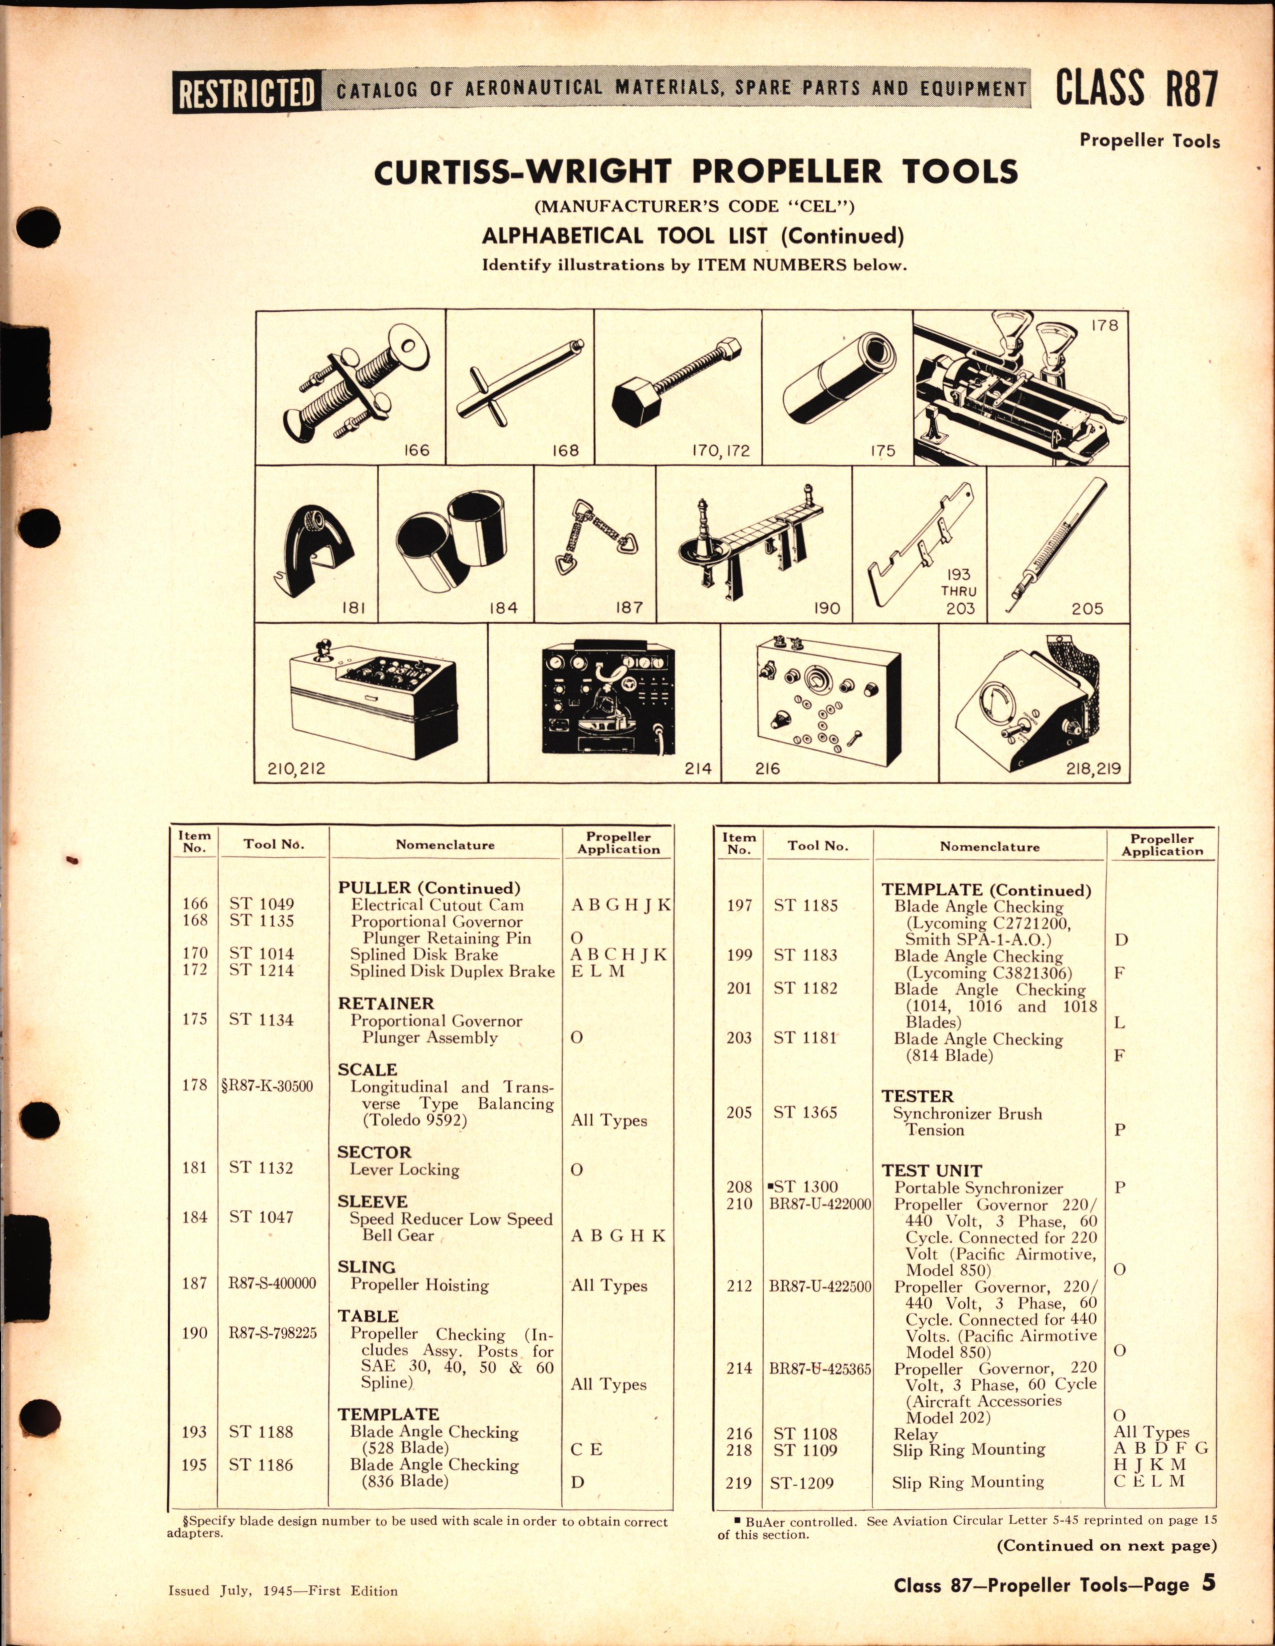 Sample page 5 from AirCorps Library document: Propeller Tools